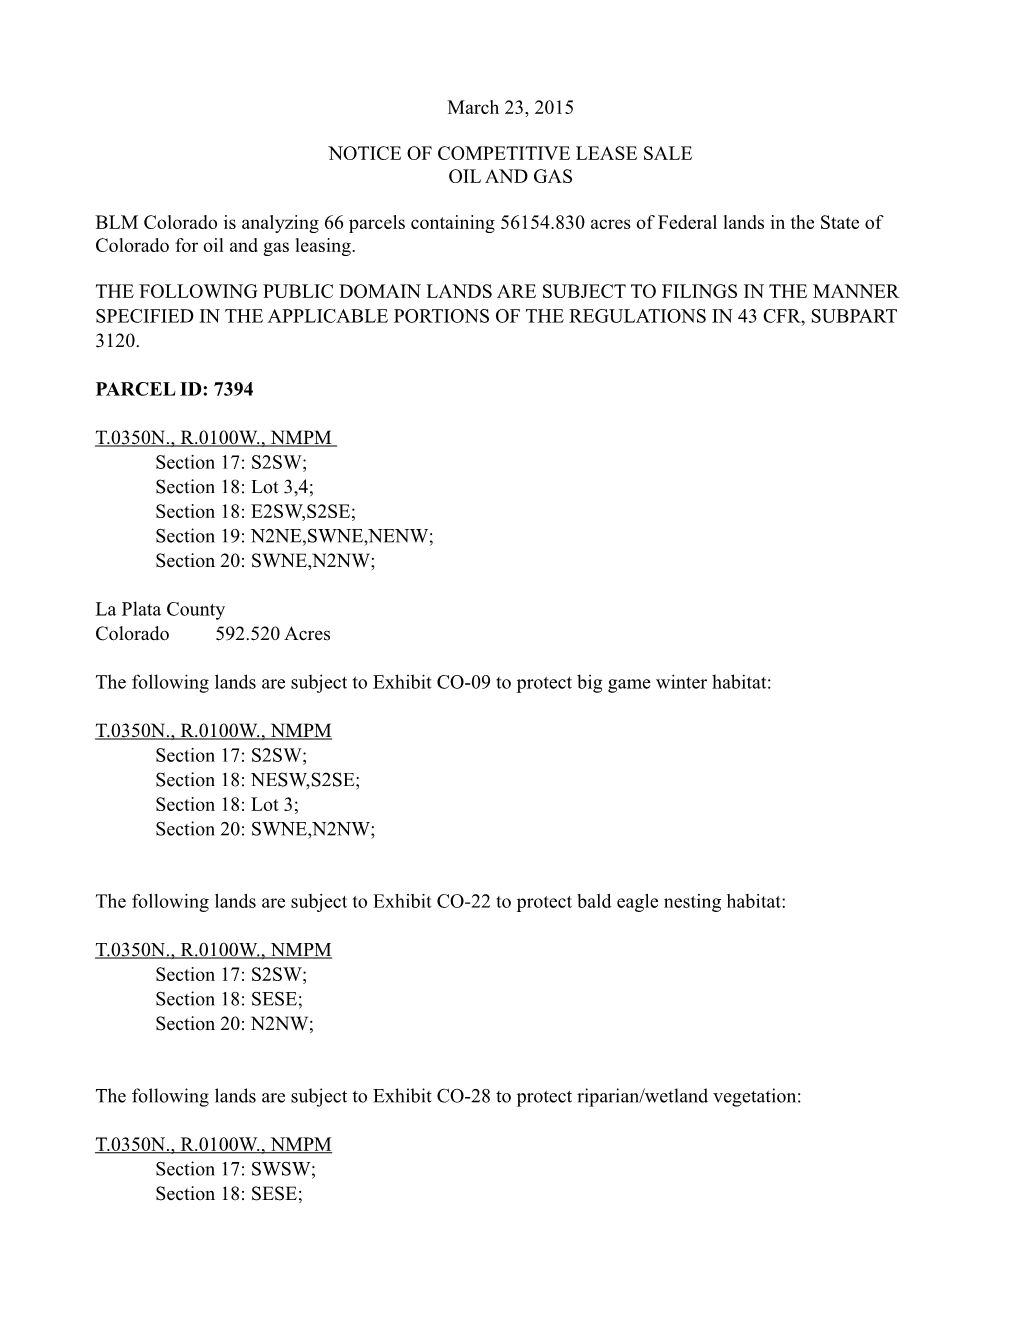 Notice of Competitive Lease Sale